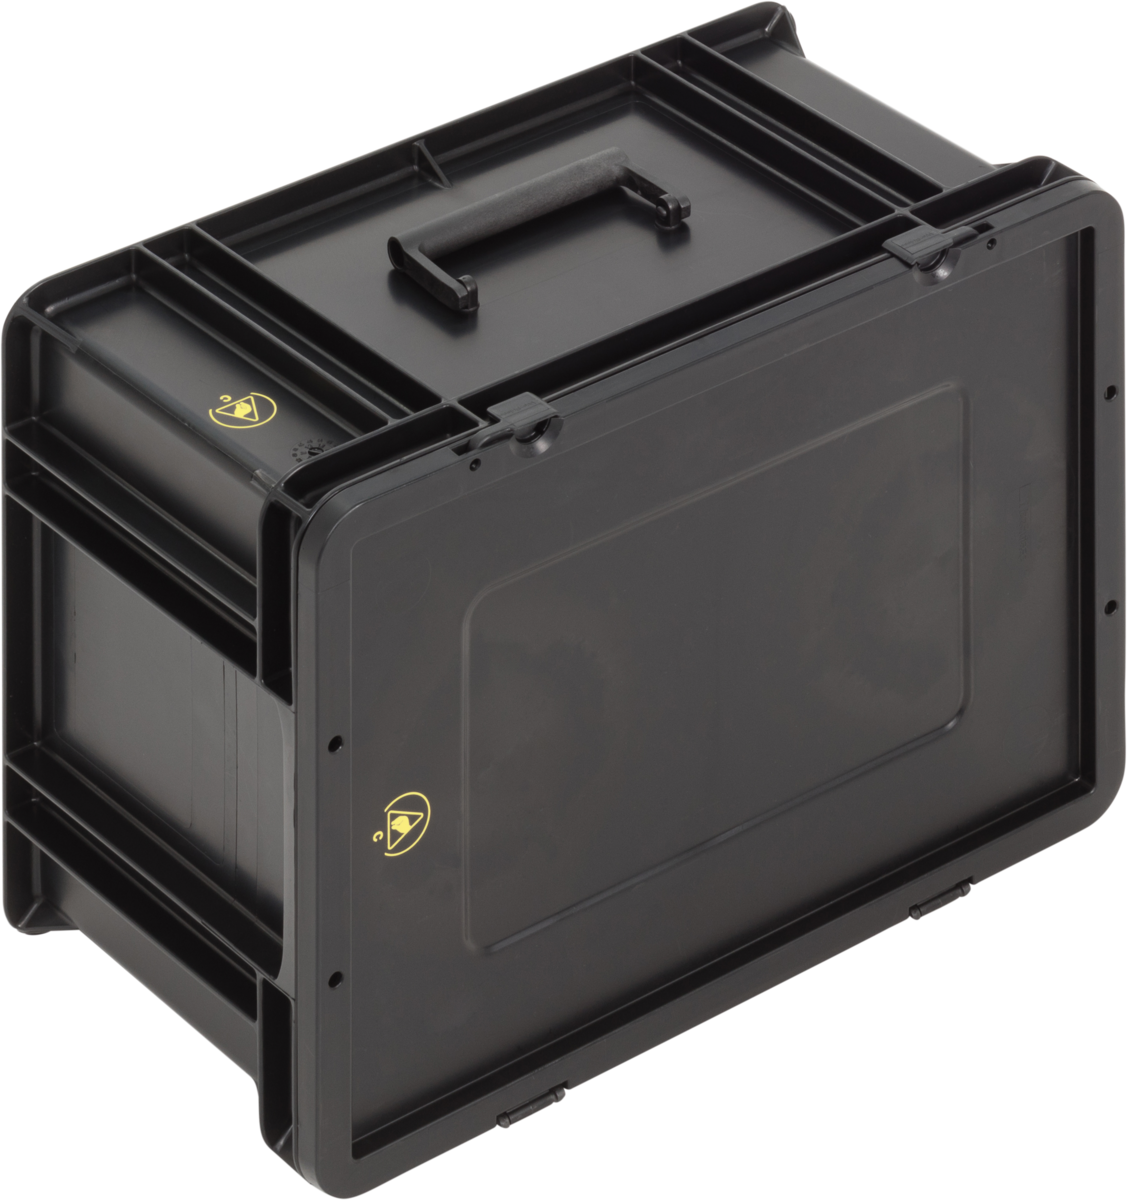 ESD-Safe-SGL-Norm-Carrying-Cases-Flat-Base-007-Ref.-4320.397.992_1004398_400x300x221_03